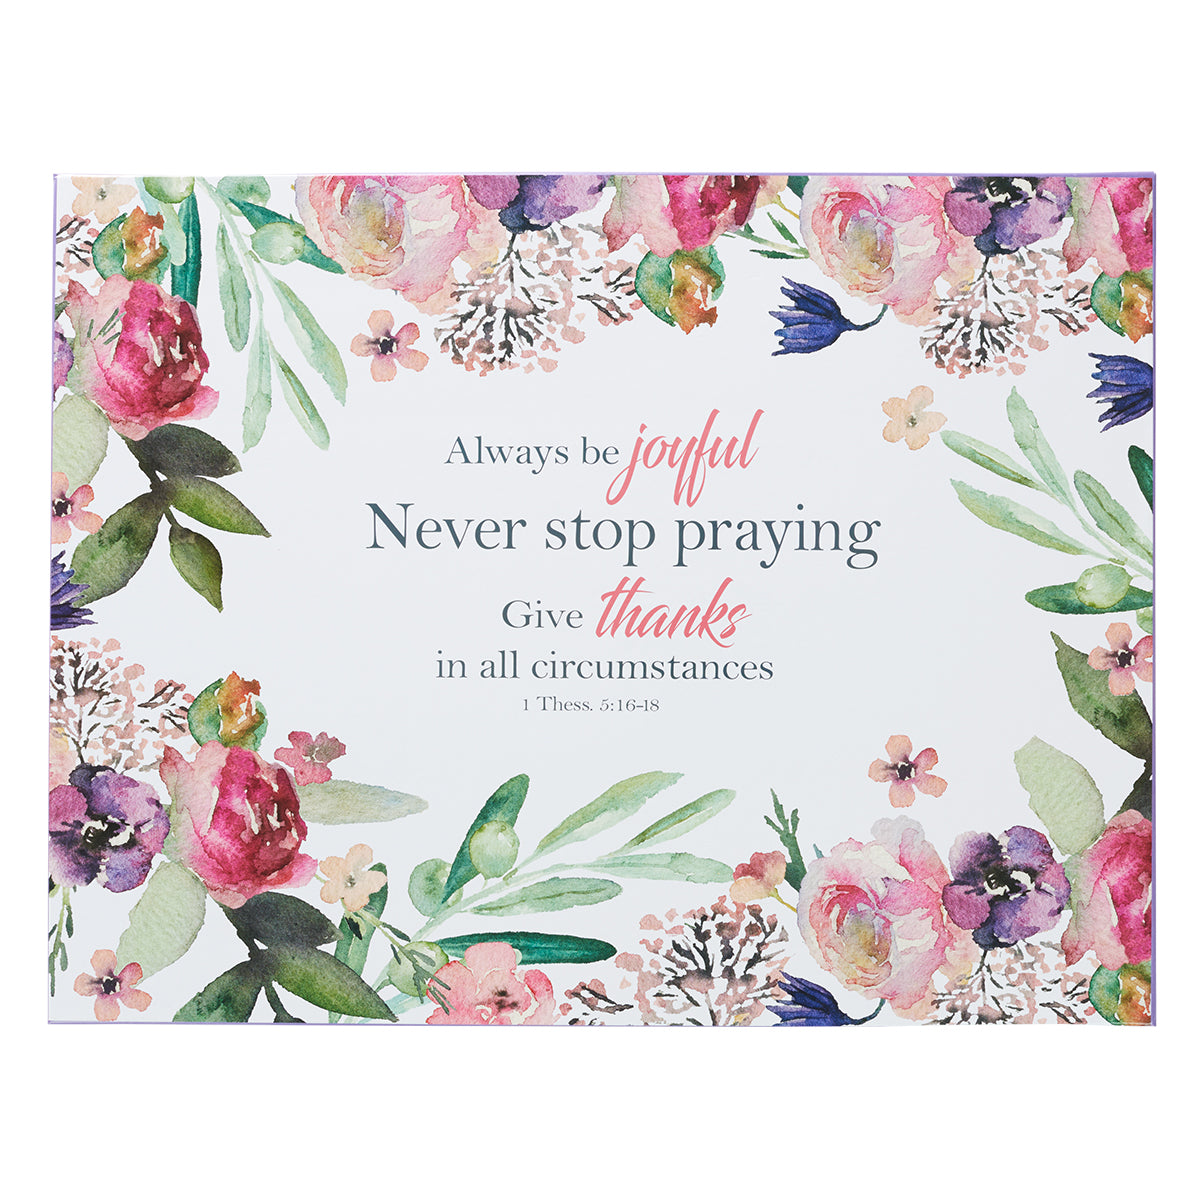 Image of Rejoice Large Glass Cutting Board - 1 Thessalonians 5: 16-18 other